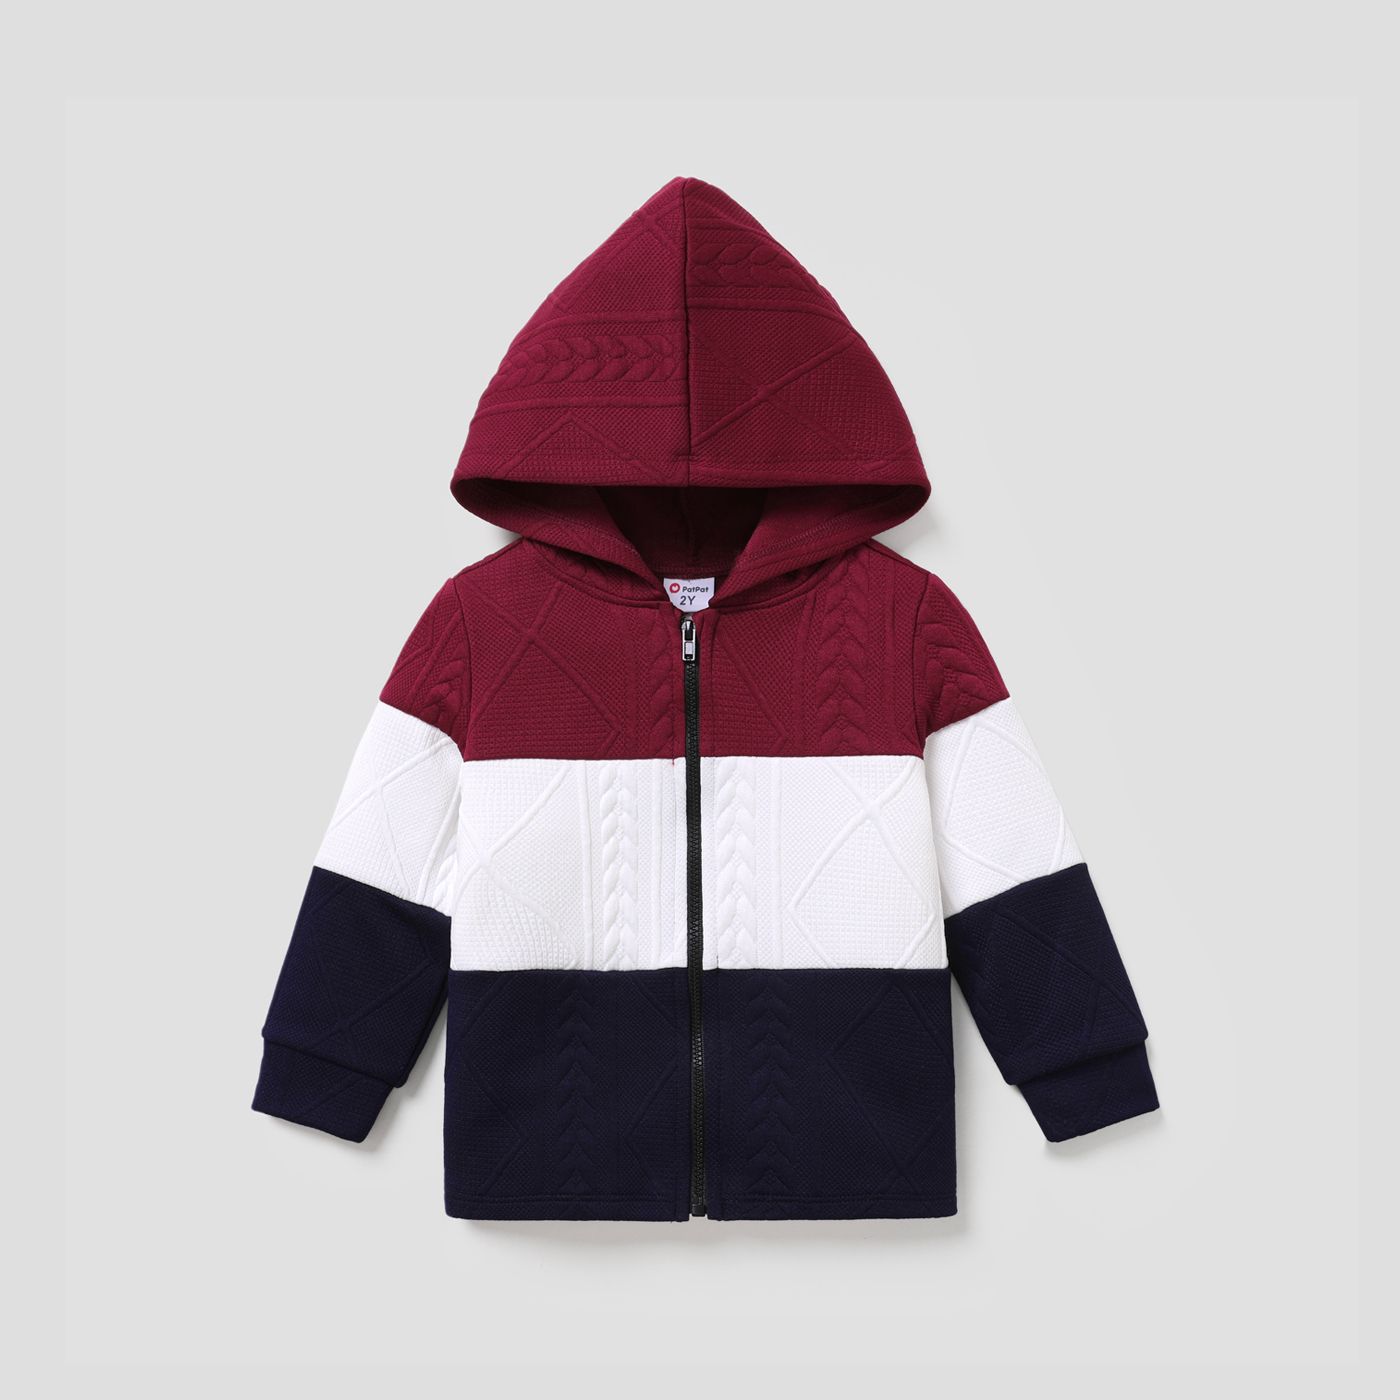 Toddler Boy Solid Fabric Stitching Hooded Pullover